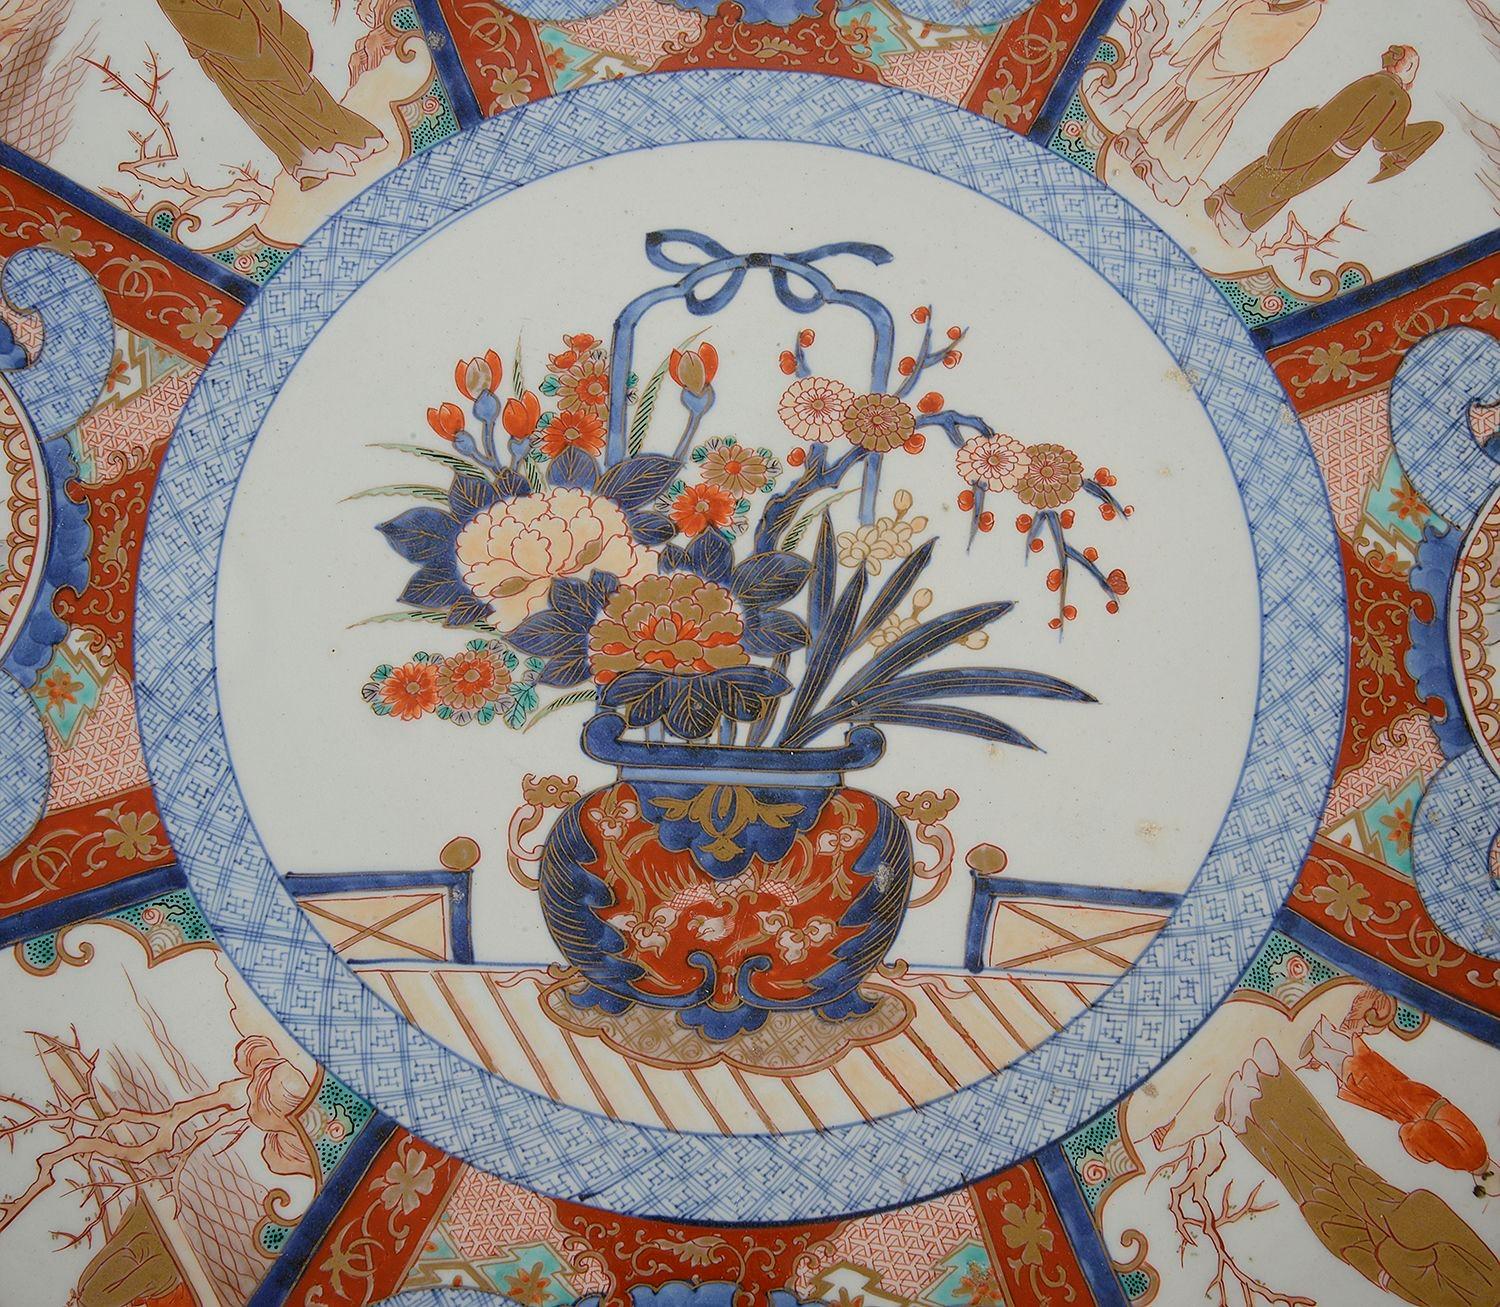 A very good quality late 19th Century Japanese Imari charger, having wonderful bold colouring, with eight inset panels depicting various courtiers and scholars, surrounding the central scene with a jardiniere full of exotic flowers. The boarders